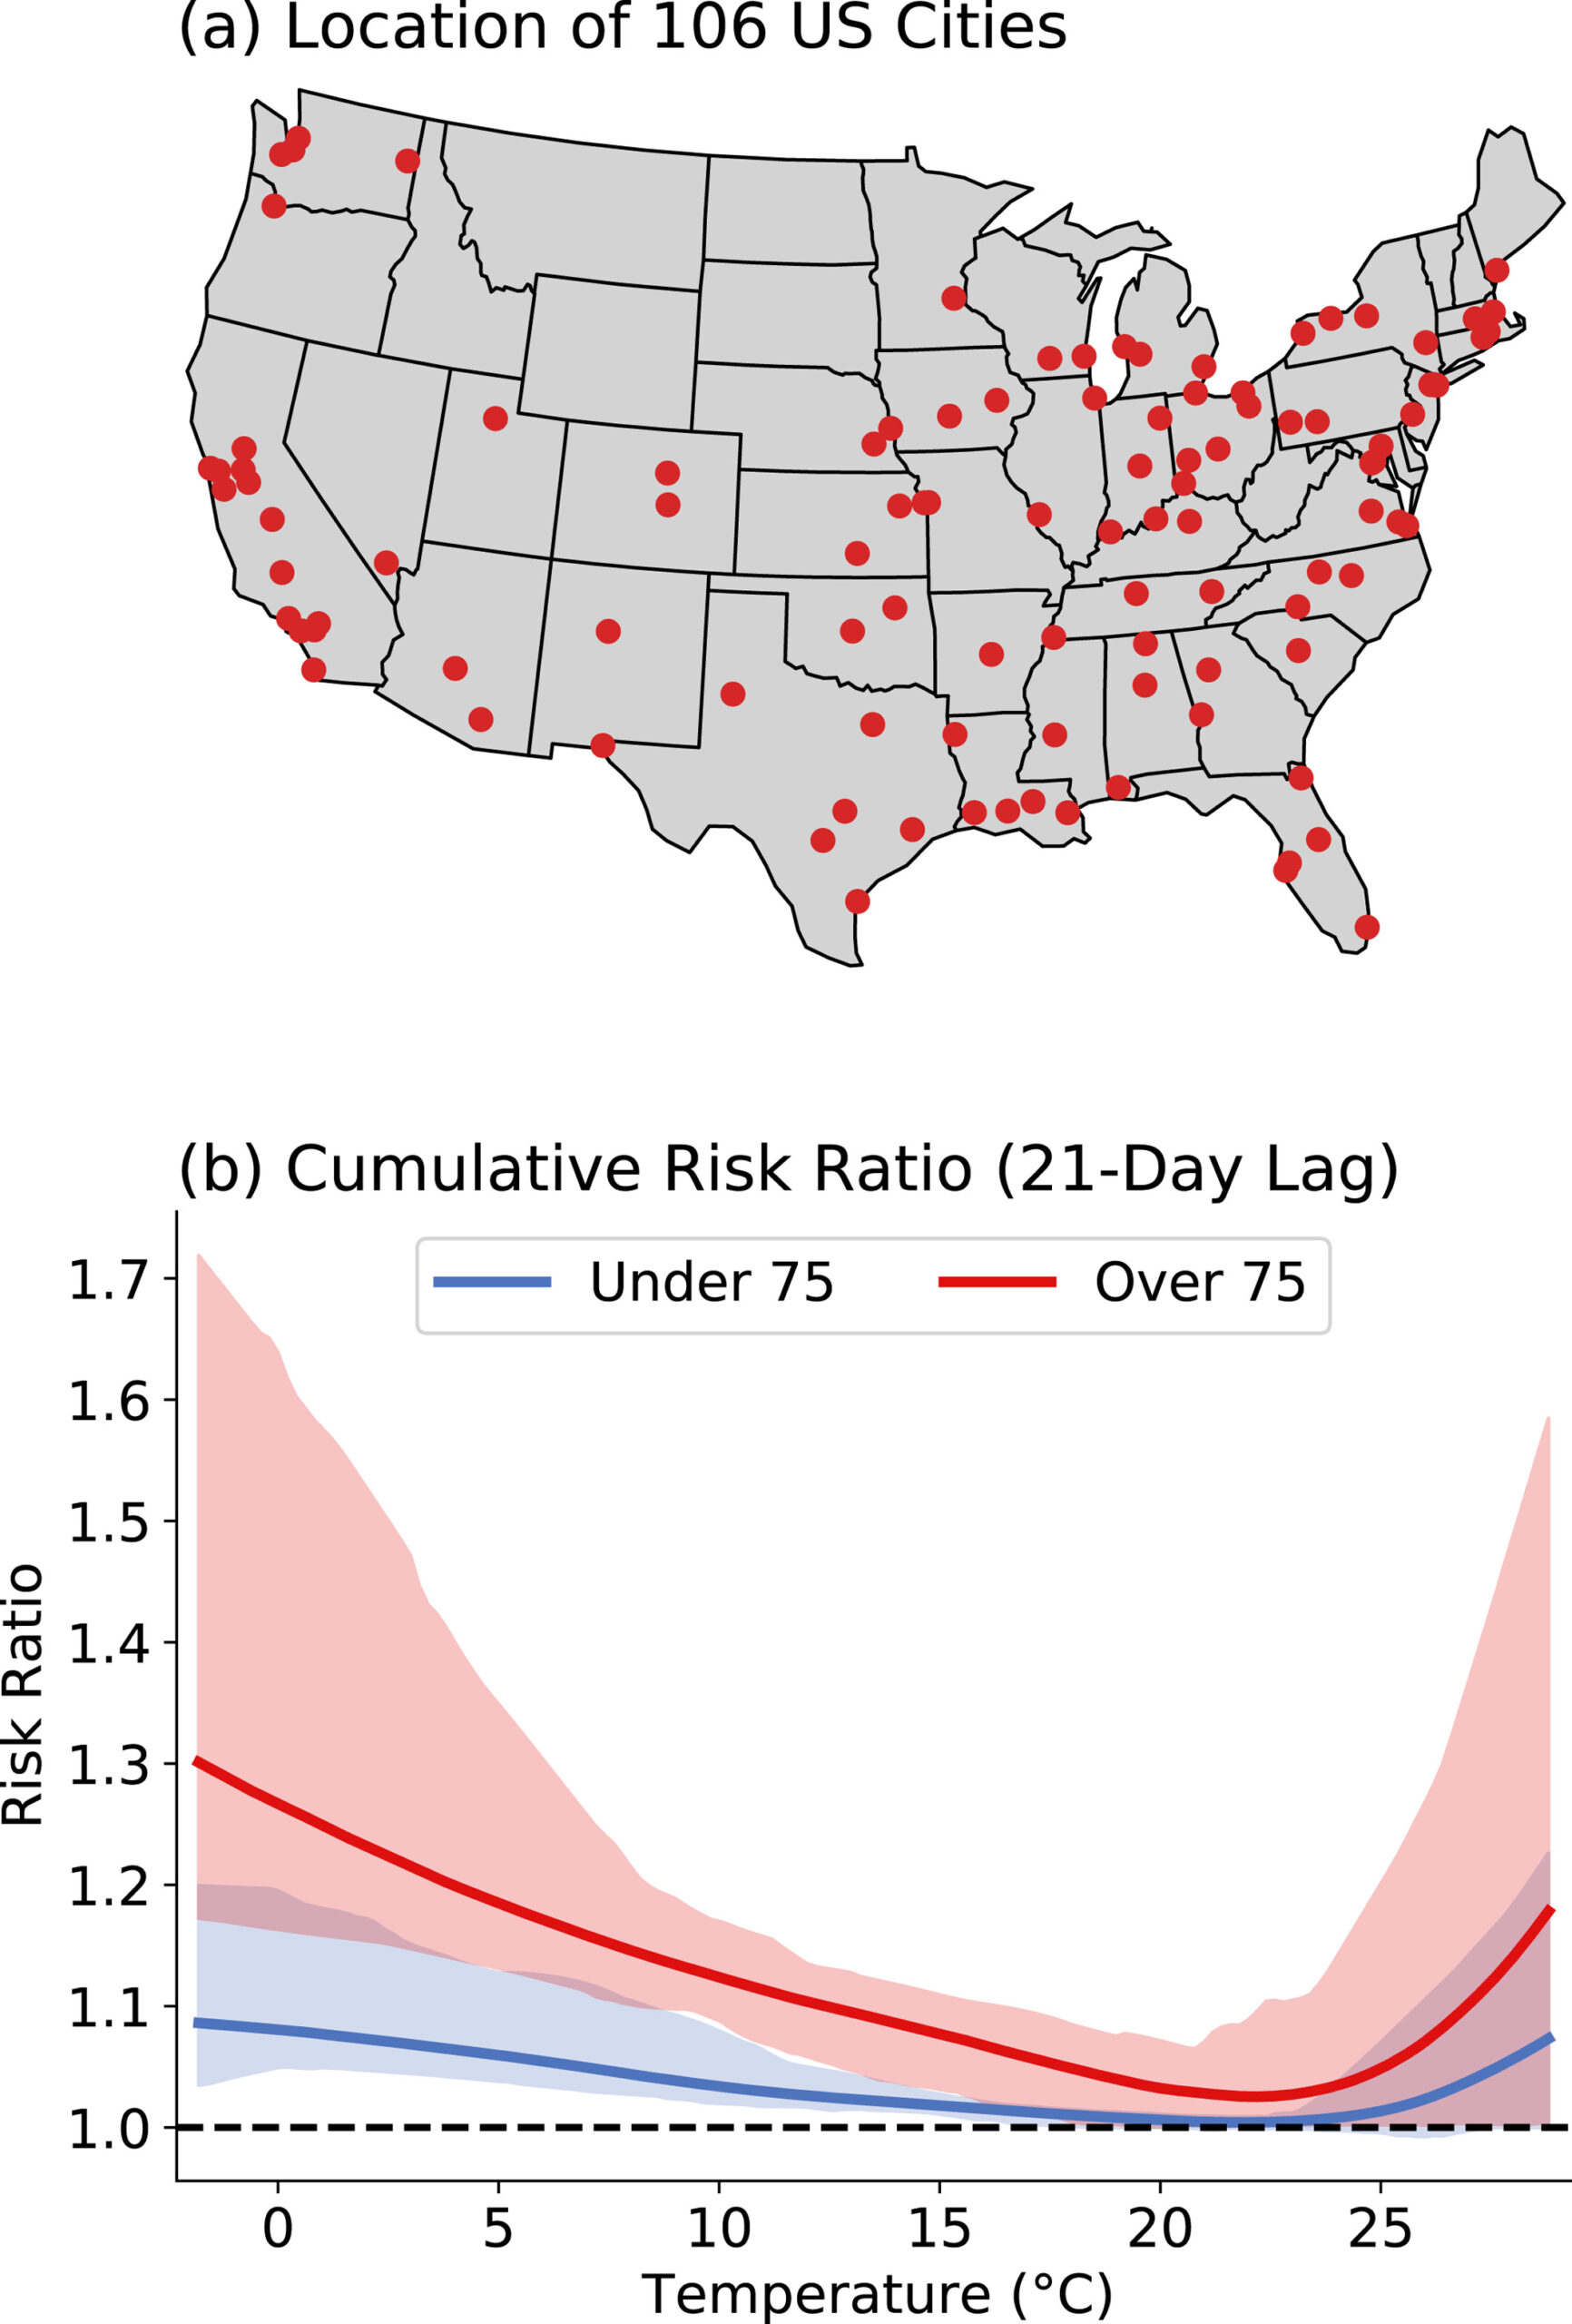 top of image shows an outline of the contiguous United States, with red dots marking the location of 106 cities included in the study. The bottom figure depicts the relative risk of temperature-related death, averaged across all cities (bottom). The blue curve marks the risk ratio for people under 75 years of age and the red curve the risk ratio for adults over 75 years. The risk ratio is the number of deaths at each temperature divided by the number of deaths at the curve minimum — the temperature at which the fewest deaths occur. This safest temperature is around 22 degrees Celsius (71.6 degrees Fahrenheit).) Shaded regions show the 5th percentile to 95th percentile range of the risk ratio curve for all cities. 